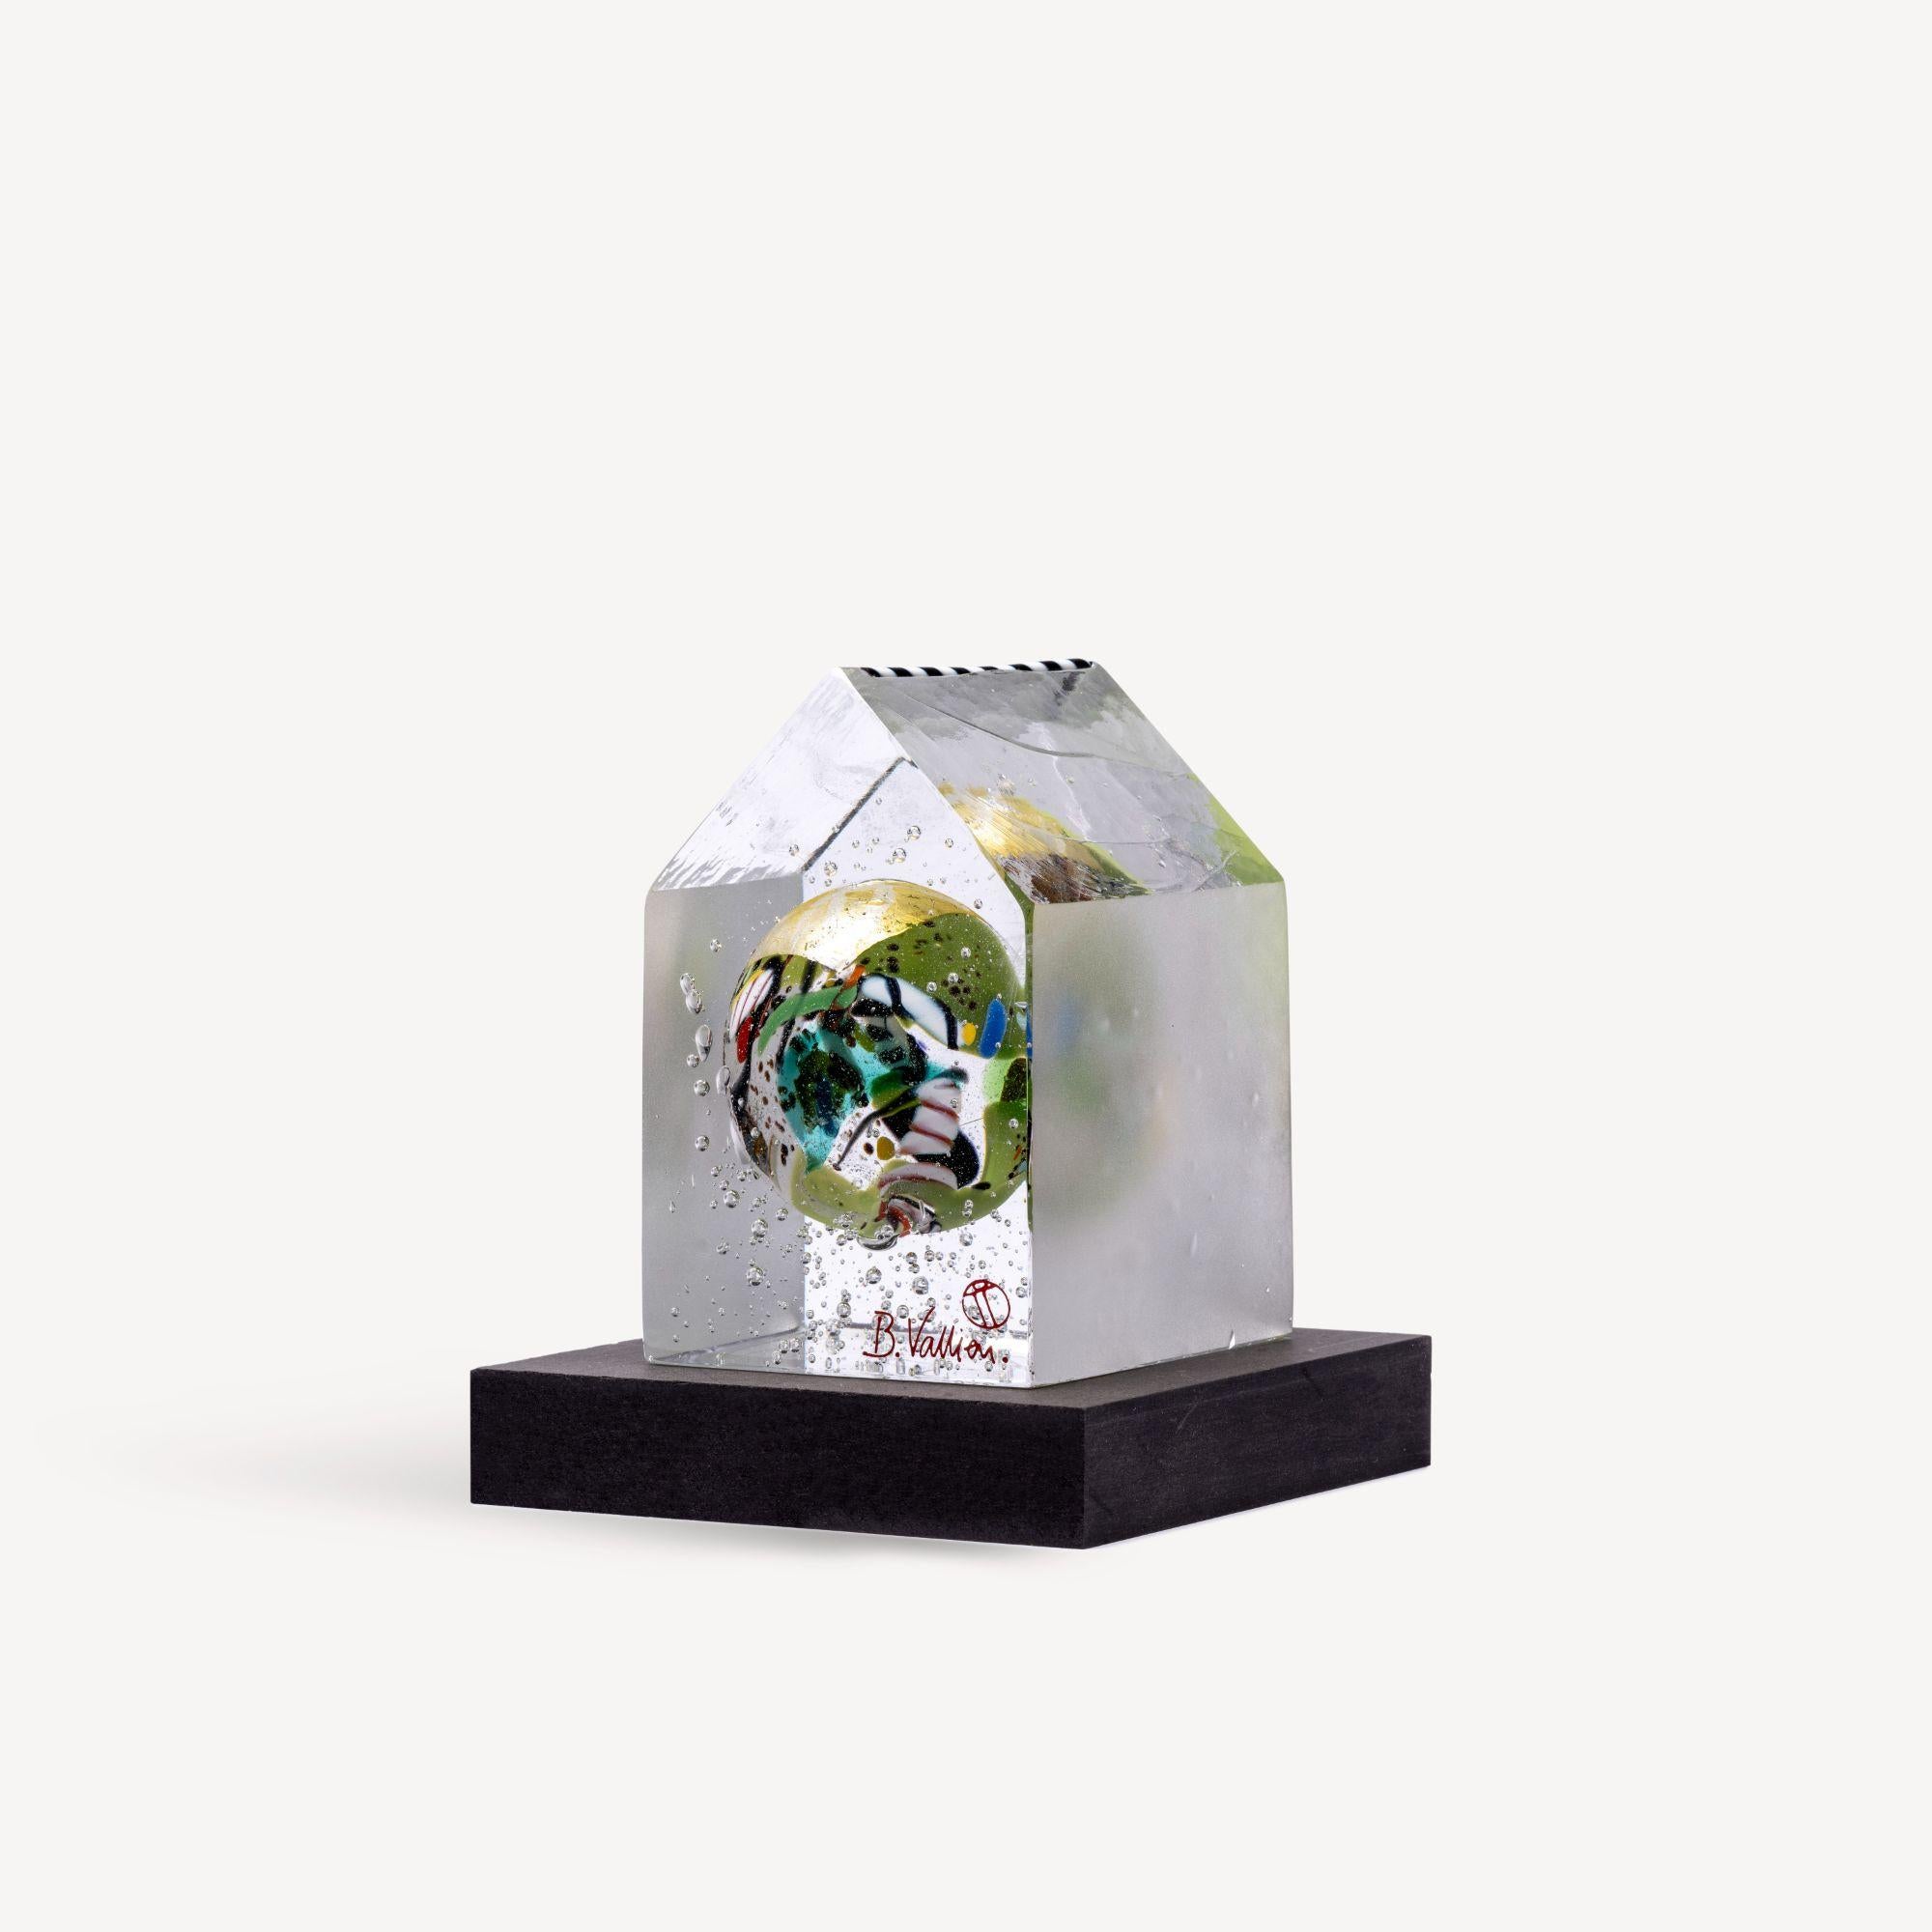 My Palace Globe is a collection of exquisite “globes” enclosed by a transparent house. These hand-made globes shift in color and style, similar to the ocean exposed to a change in light. As a result, this sculpture comes to life, reminiscent of